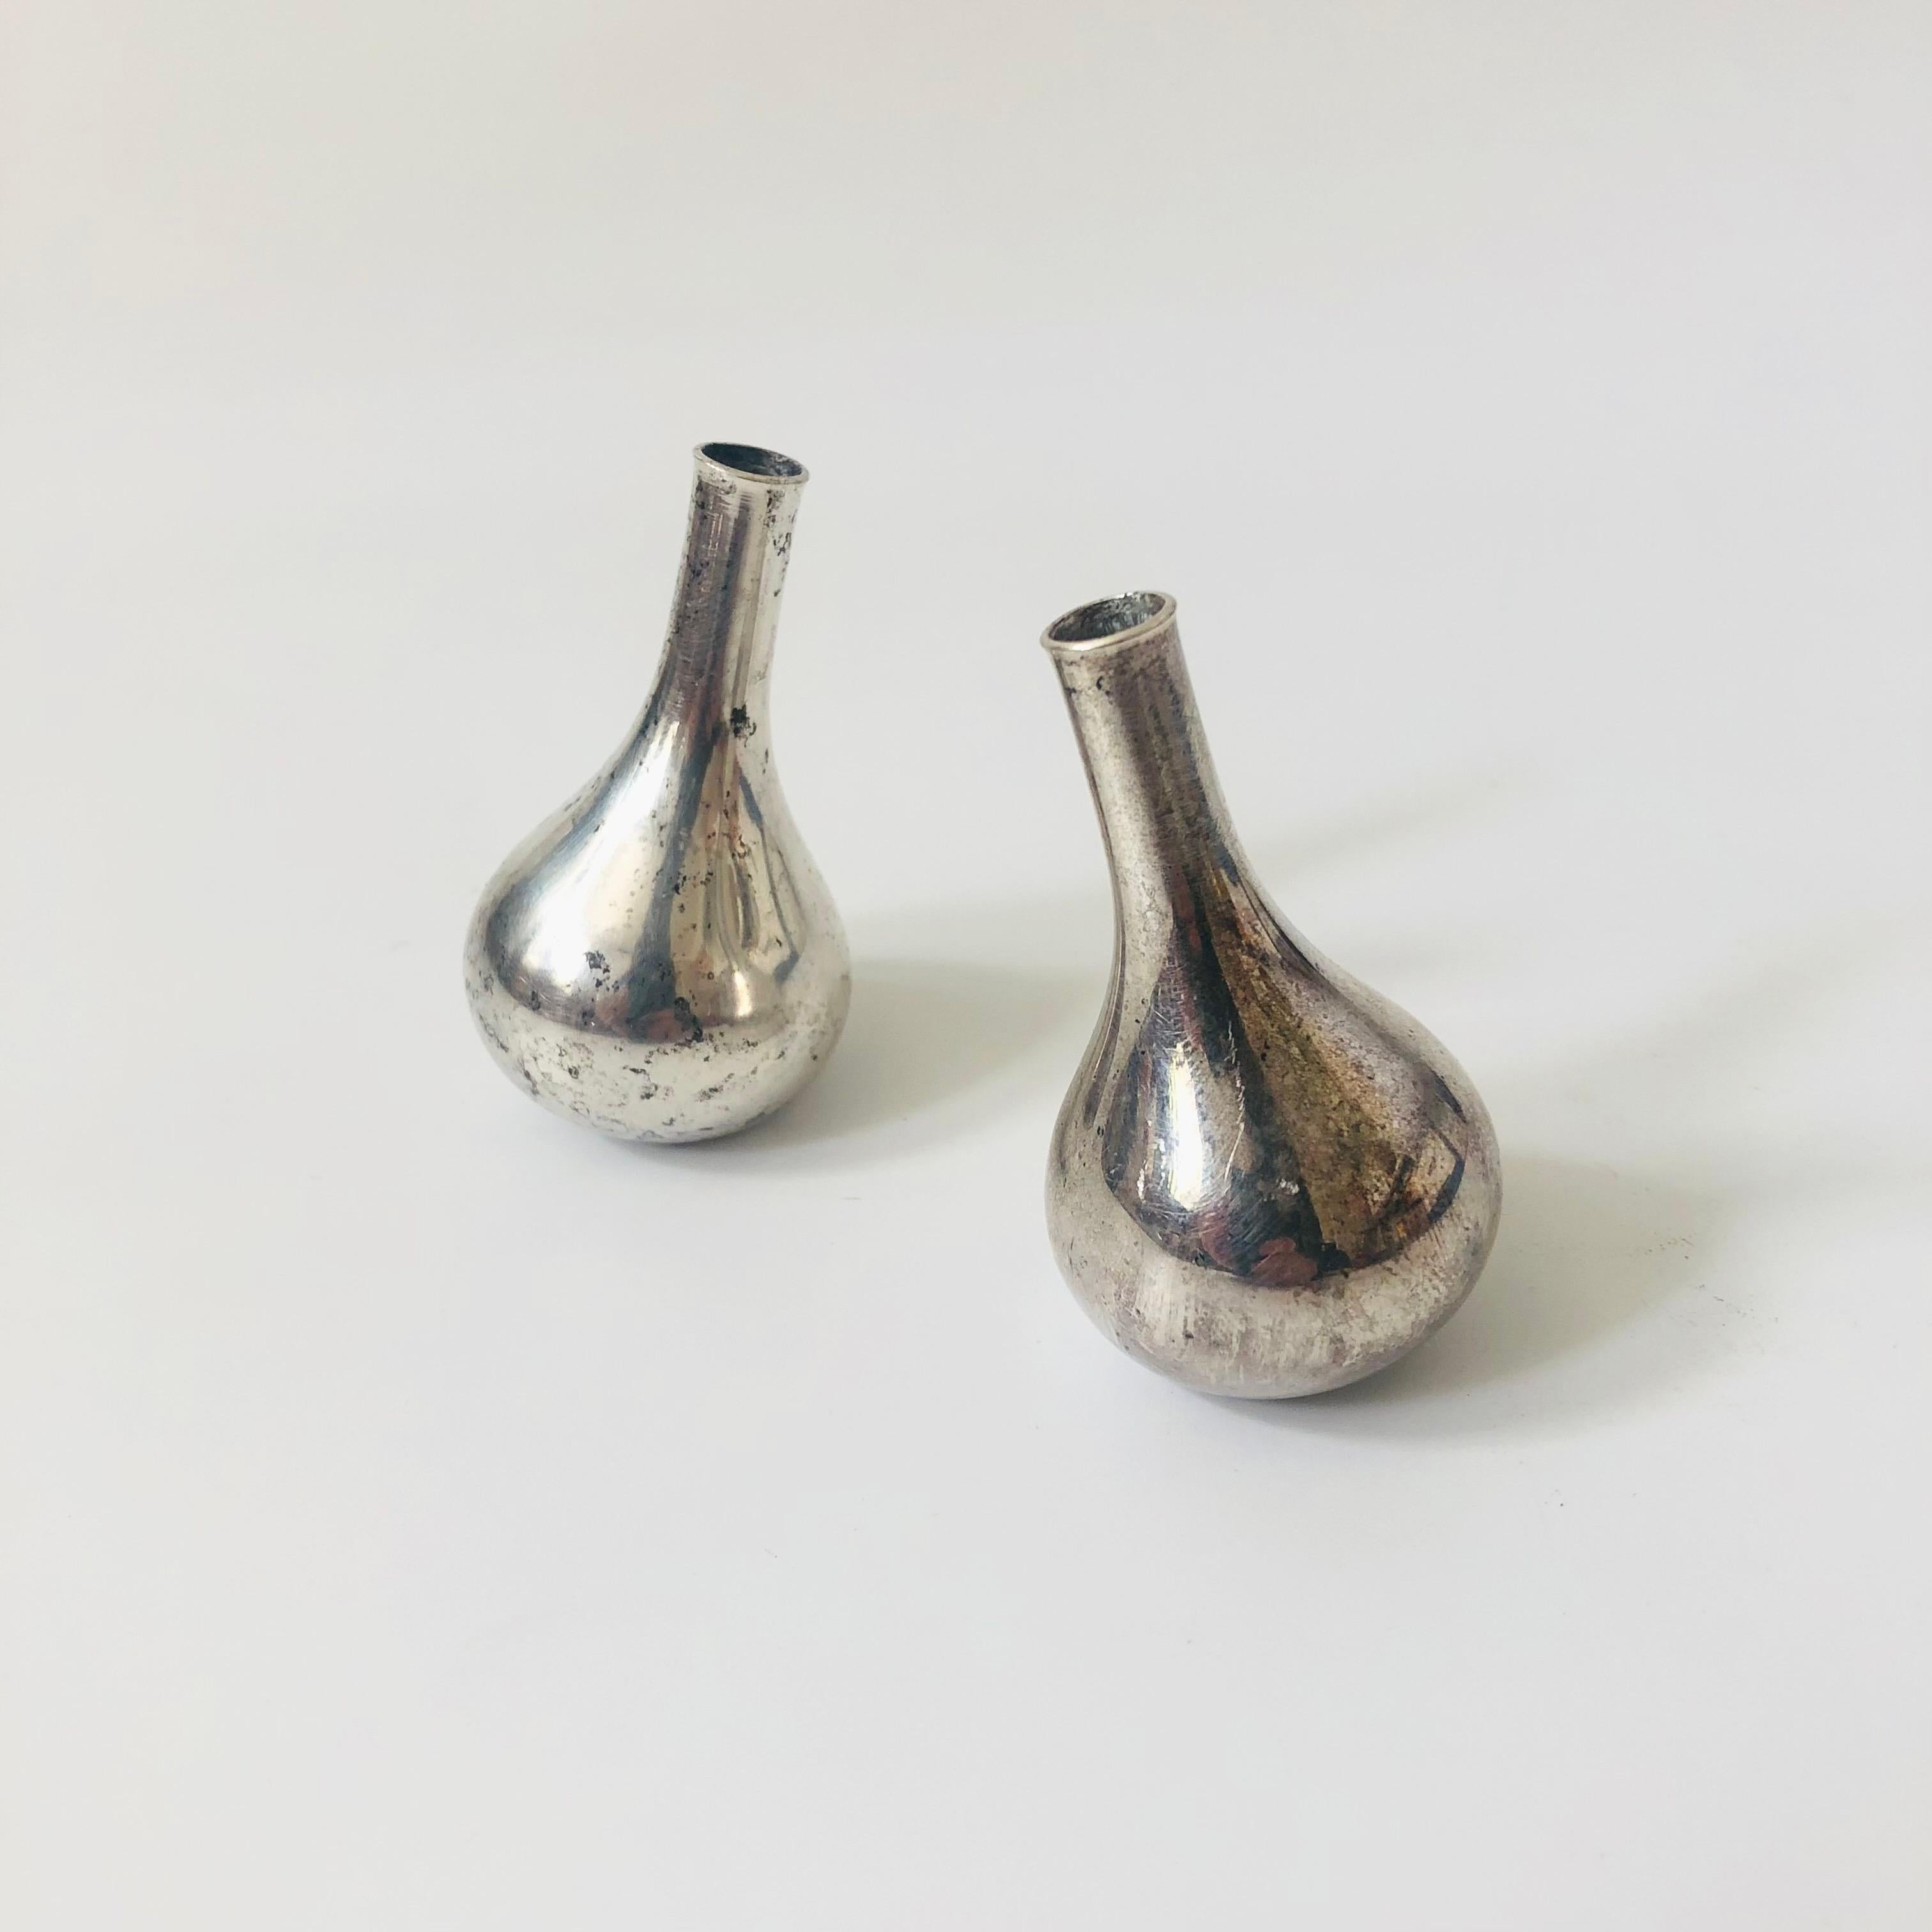 A pair of mid century silver plated tiny taper candle holders. Onion shaped with faceted bases so that the candle holders can either stand upright or tilted. Made in Denmark by Dansk and designed by Jens Quistgaard, each pieces is marked on the